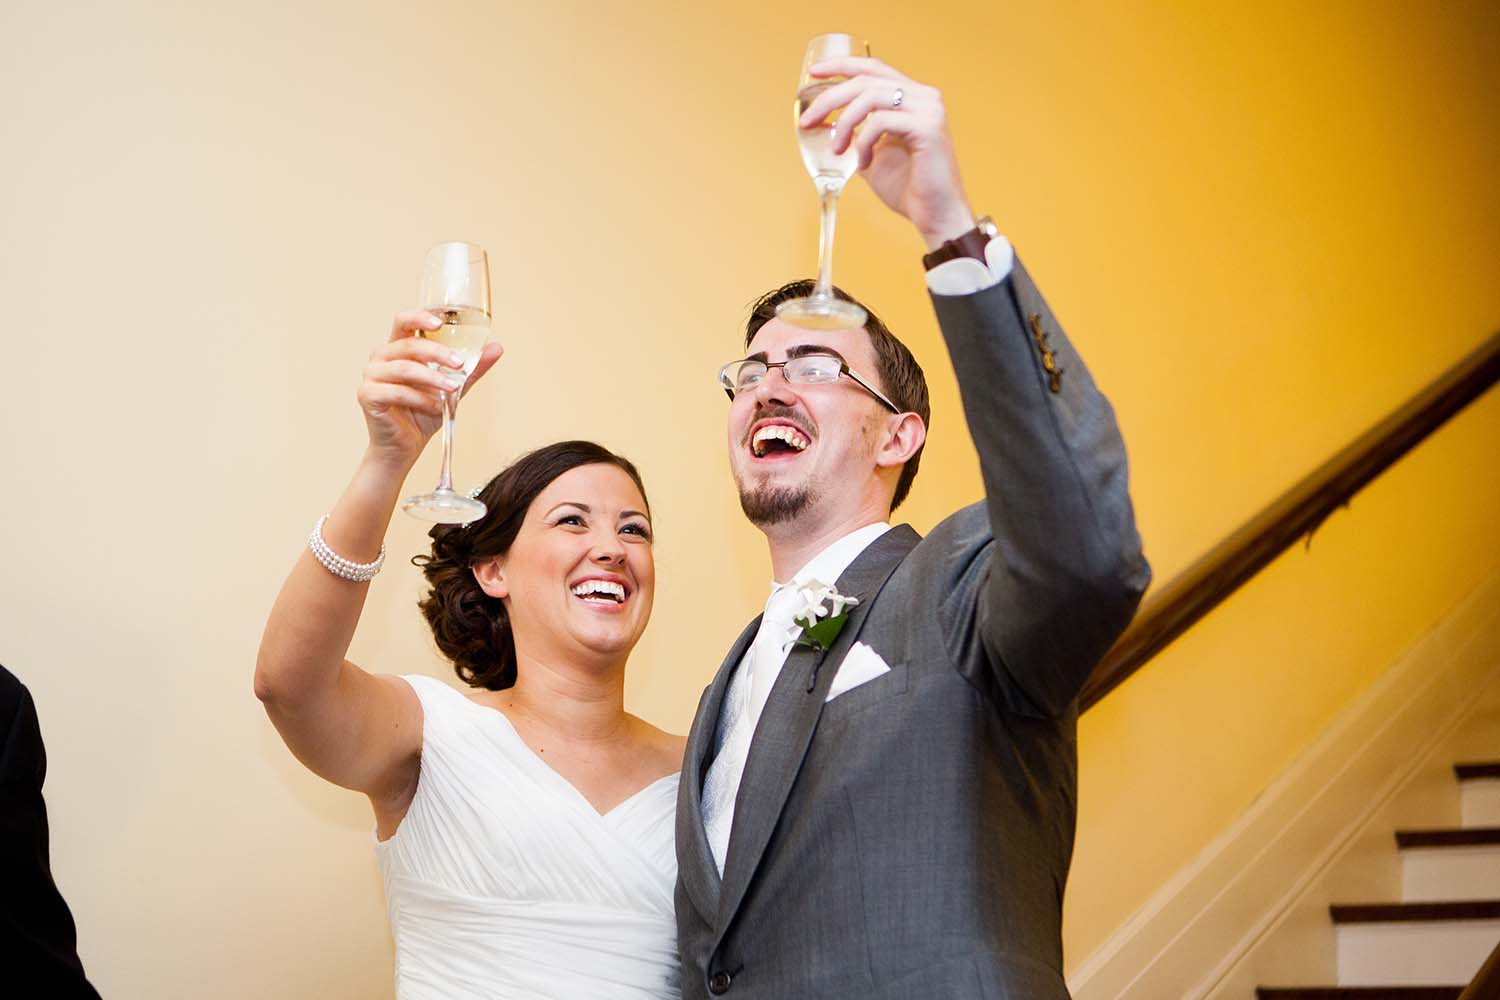 Bride and groom toasting with champagne glasses during wedding reception toasts, Elmhurst, Illinois